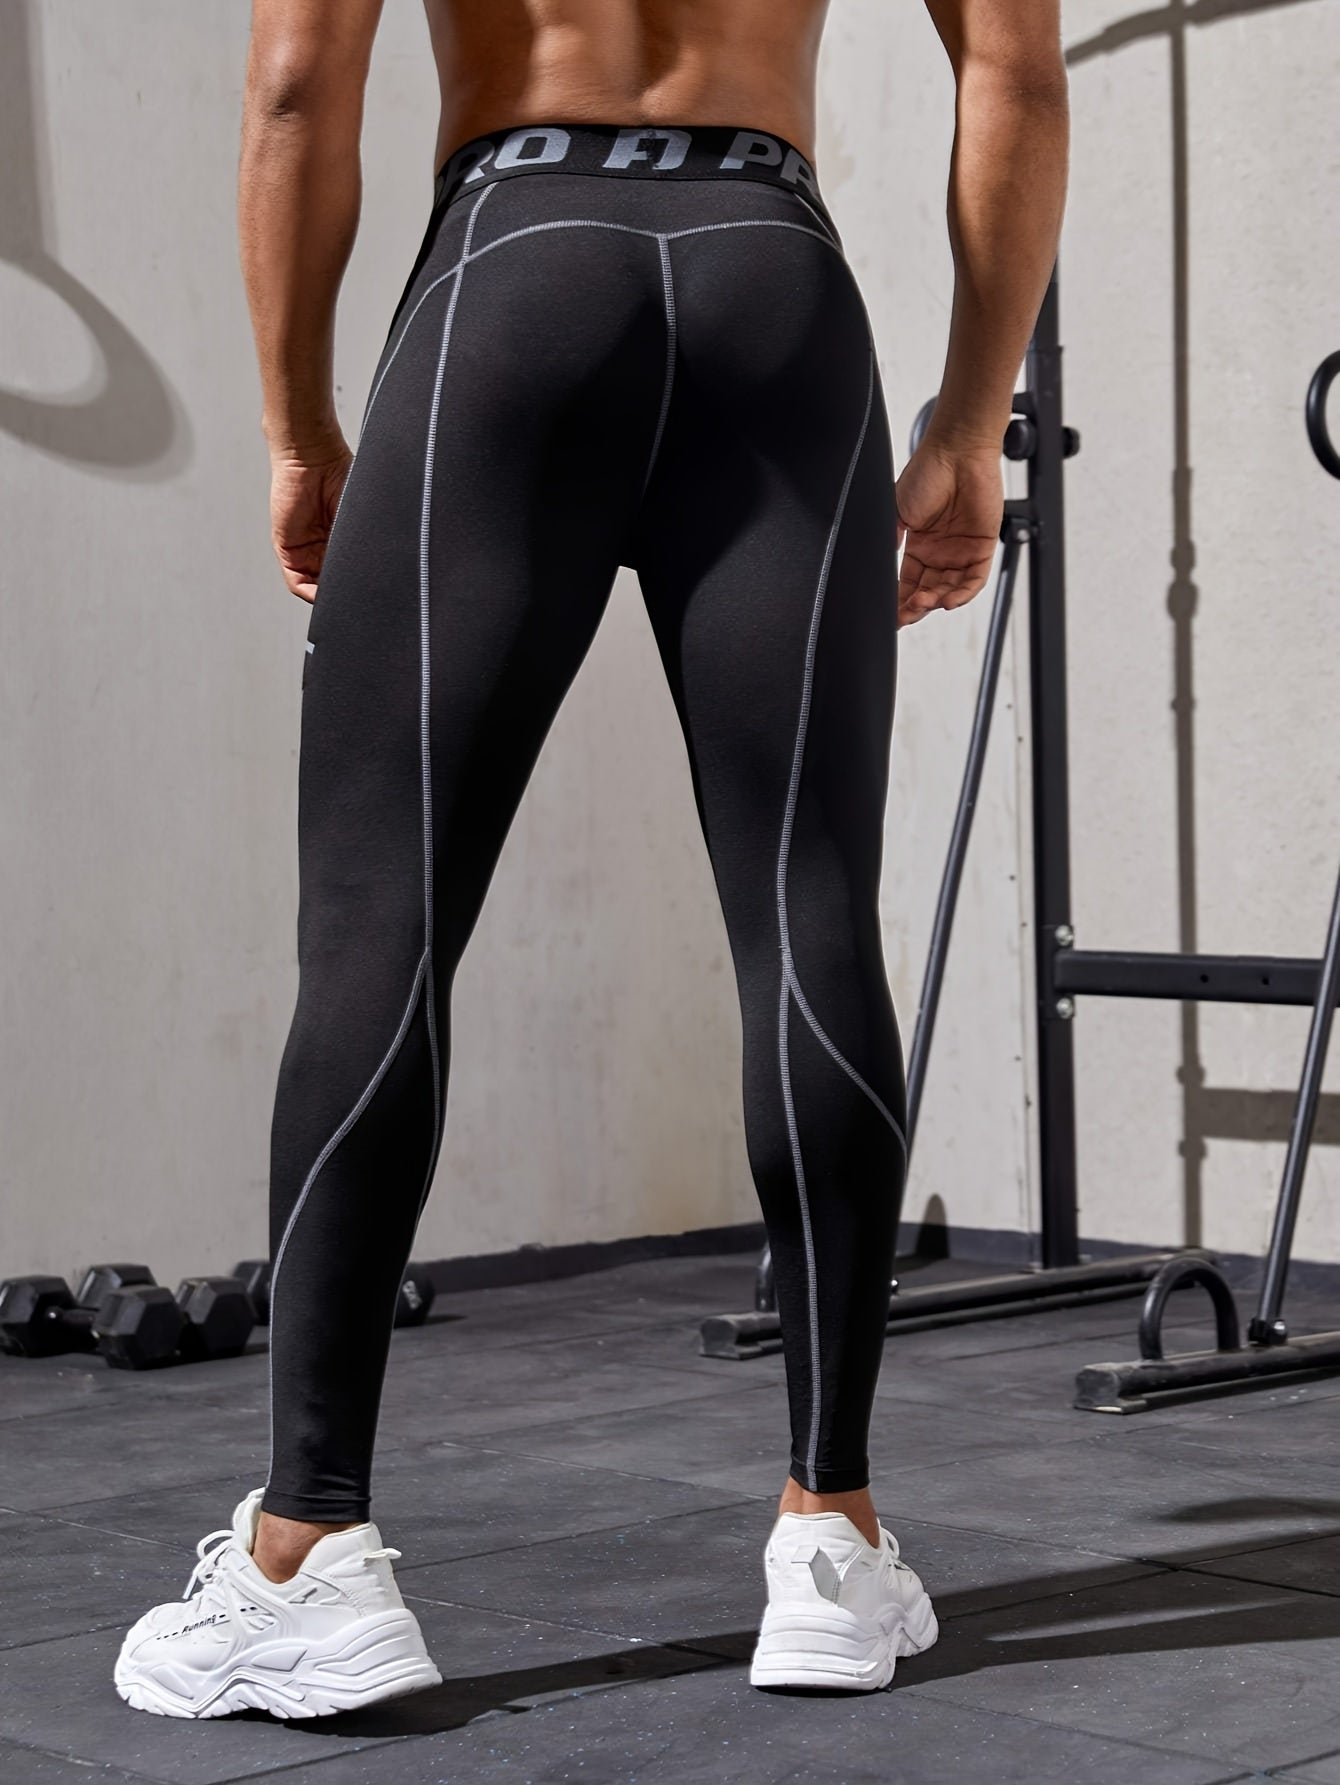 Men's High Stretch Tight Long Compression Pants, Activewear, Lightweight Quick Dry Athletic Leggings For Gym Fitness Workout Basketball